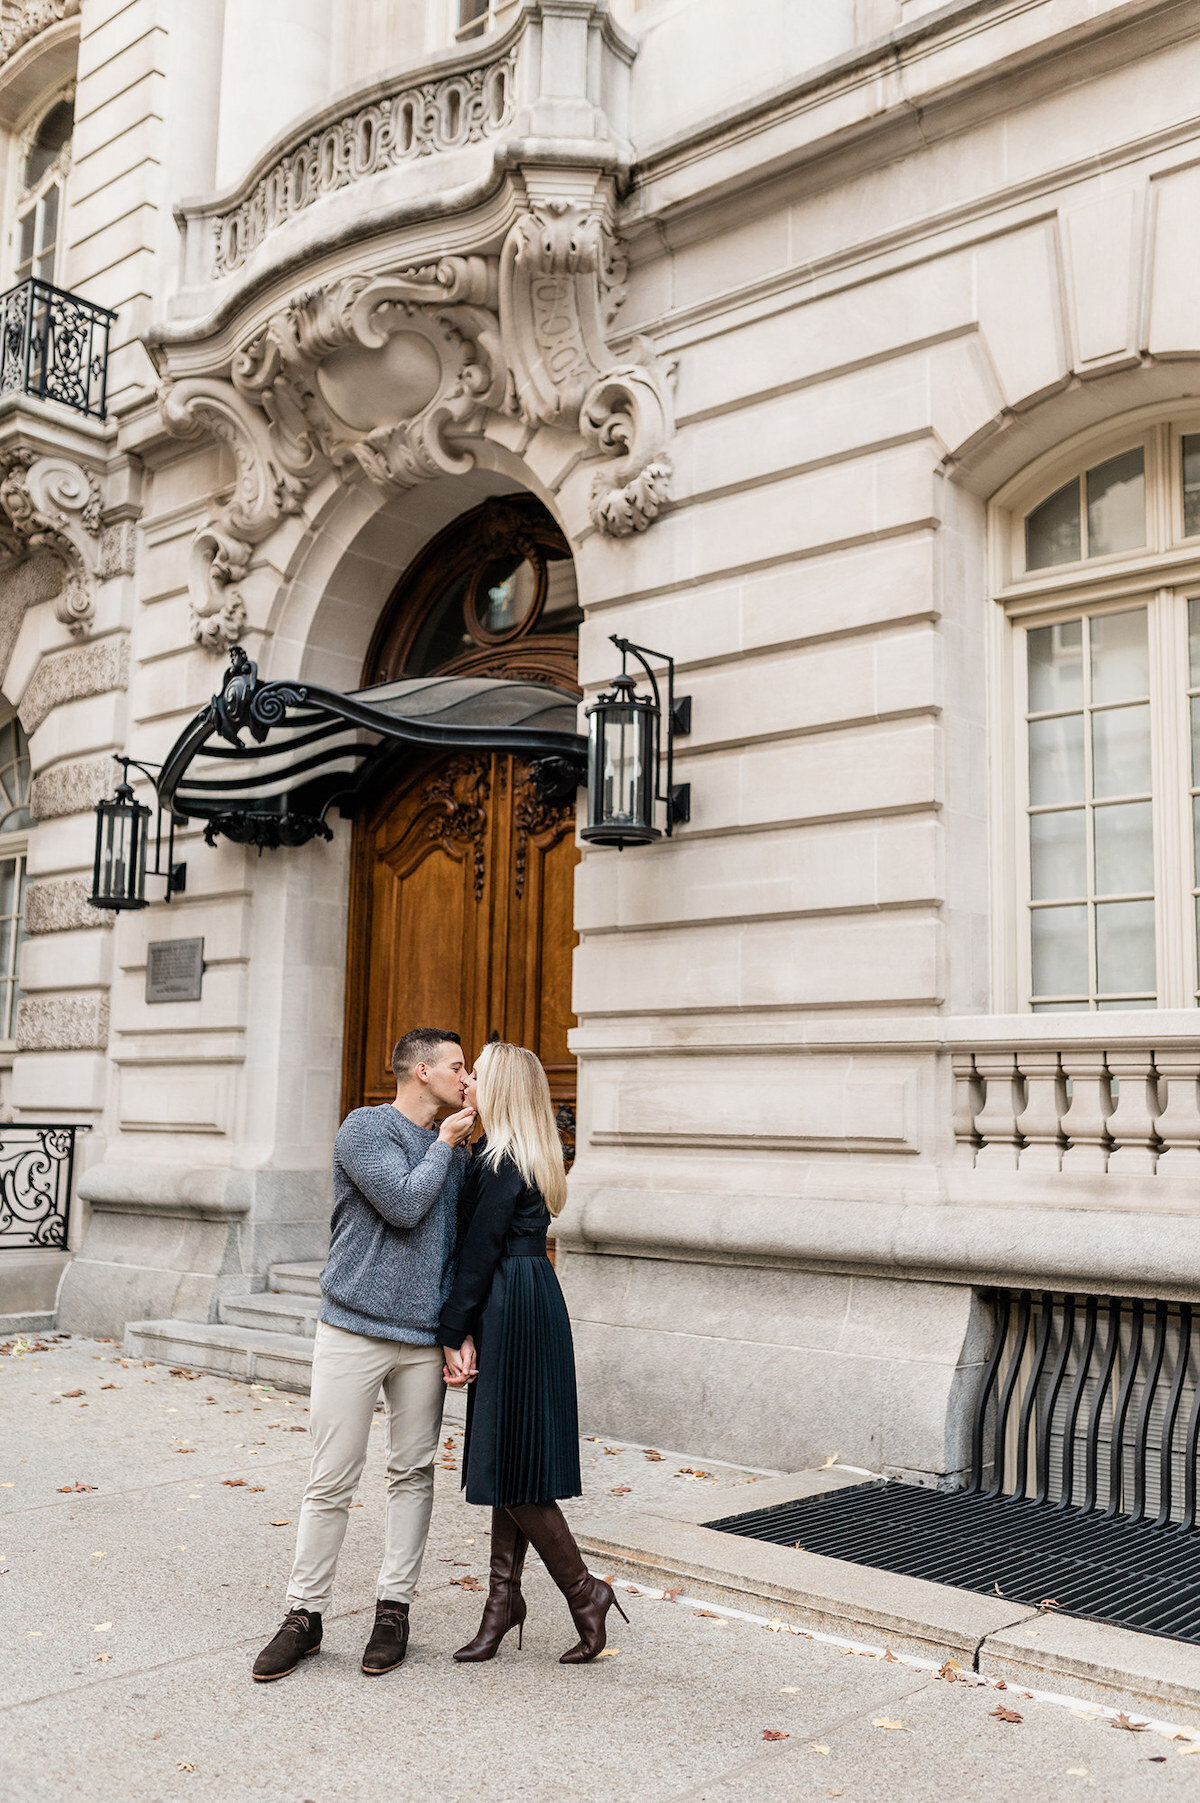 From the heart of New York to the heart of your love story, our luxury engagement sessions blend fine artistry with genuine emotions. Each image is a work of art that tells your tale.